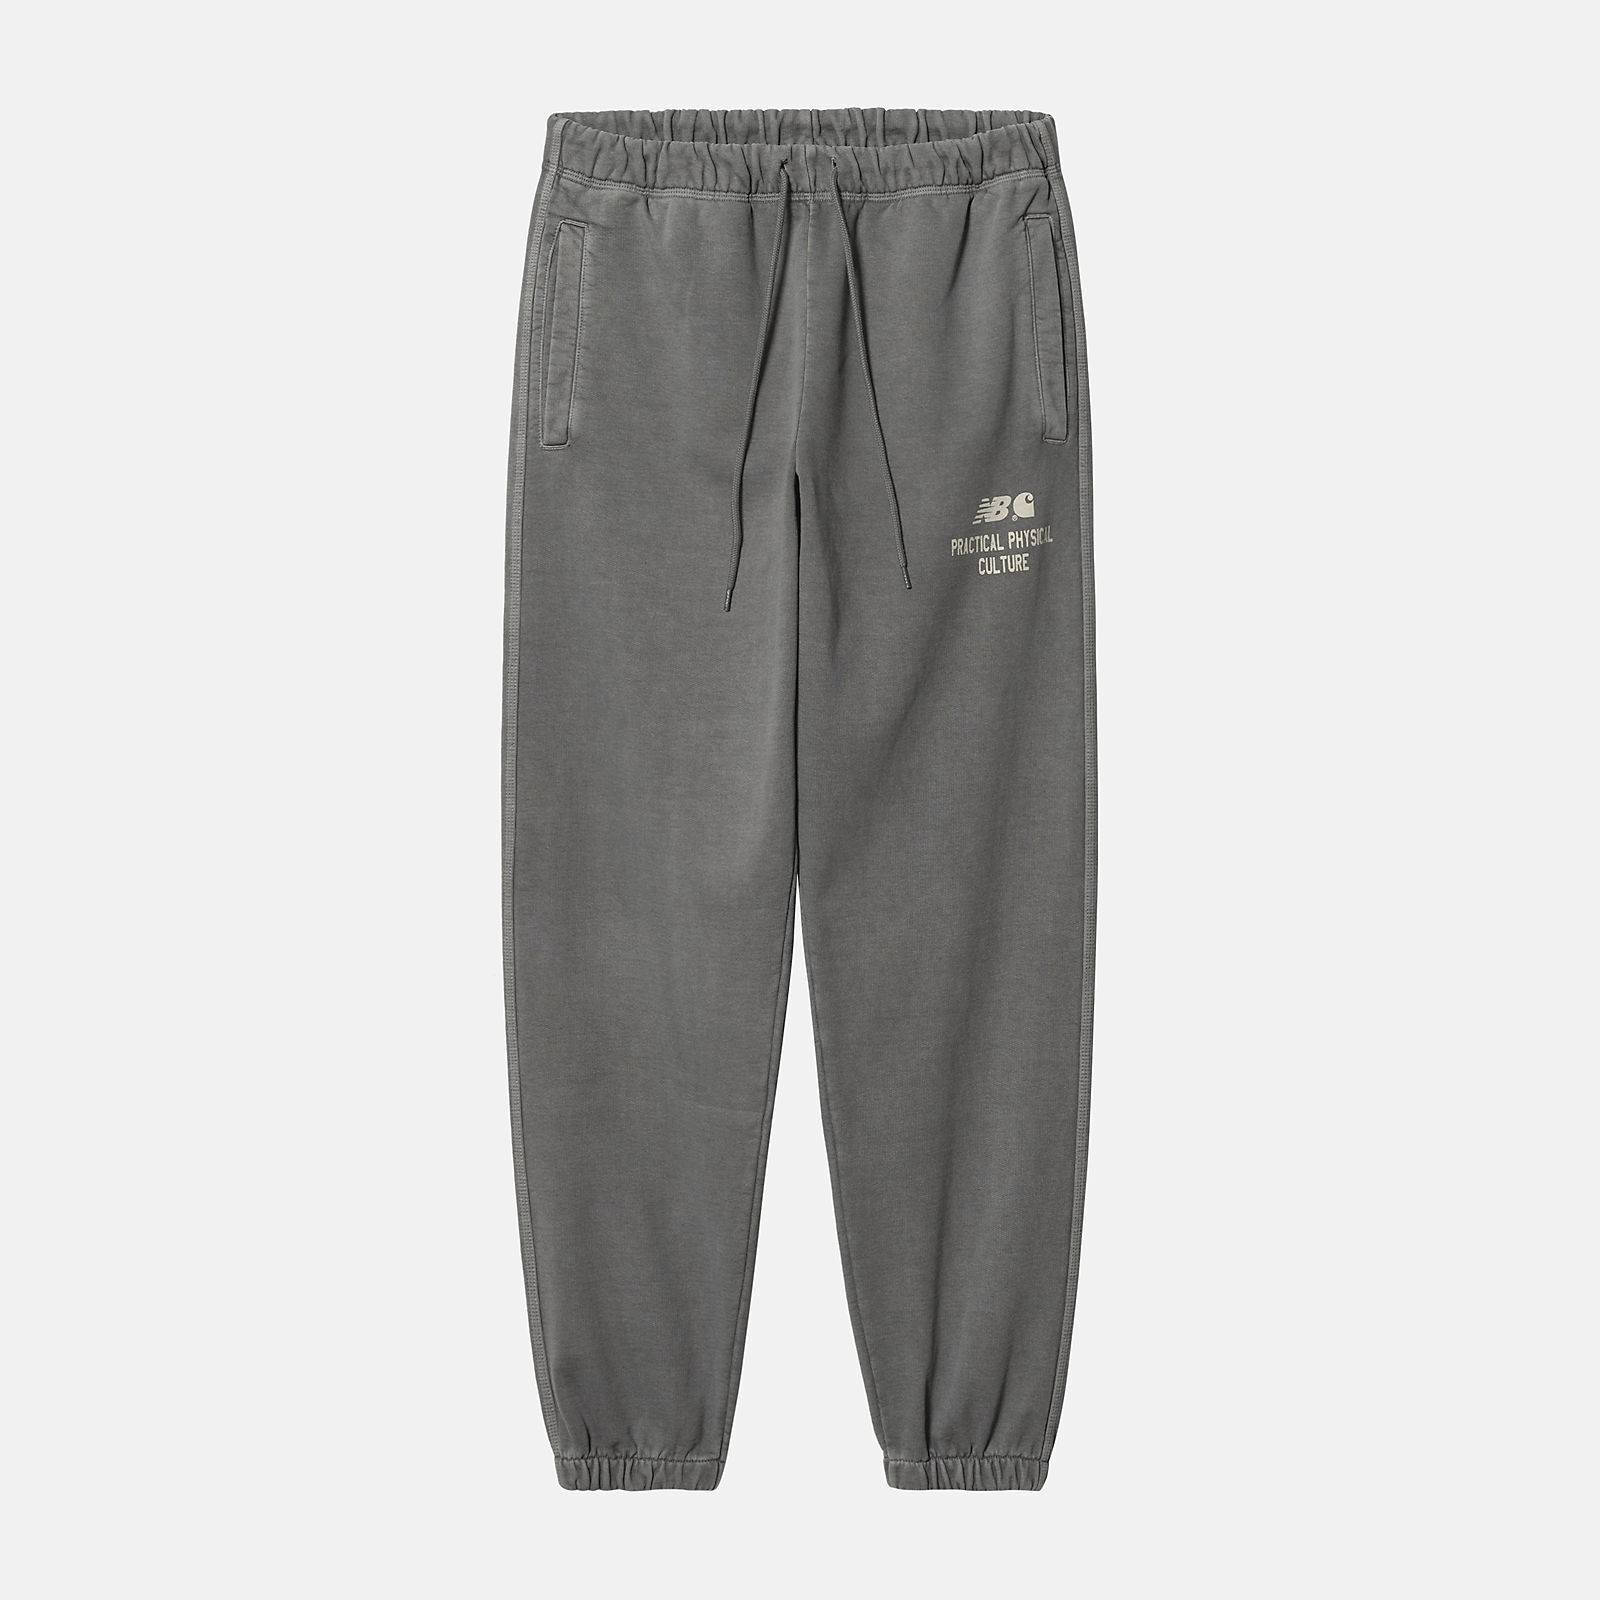 New Balance x Carhartt WIP Sweatpant - Magnet | The Sole Supplier